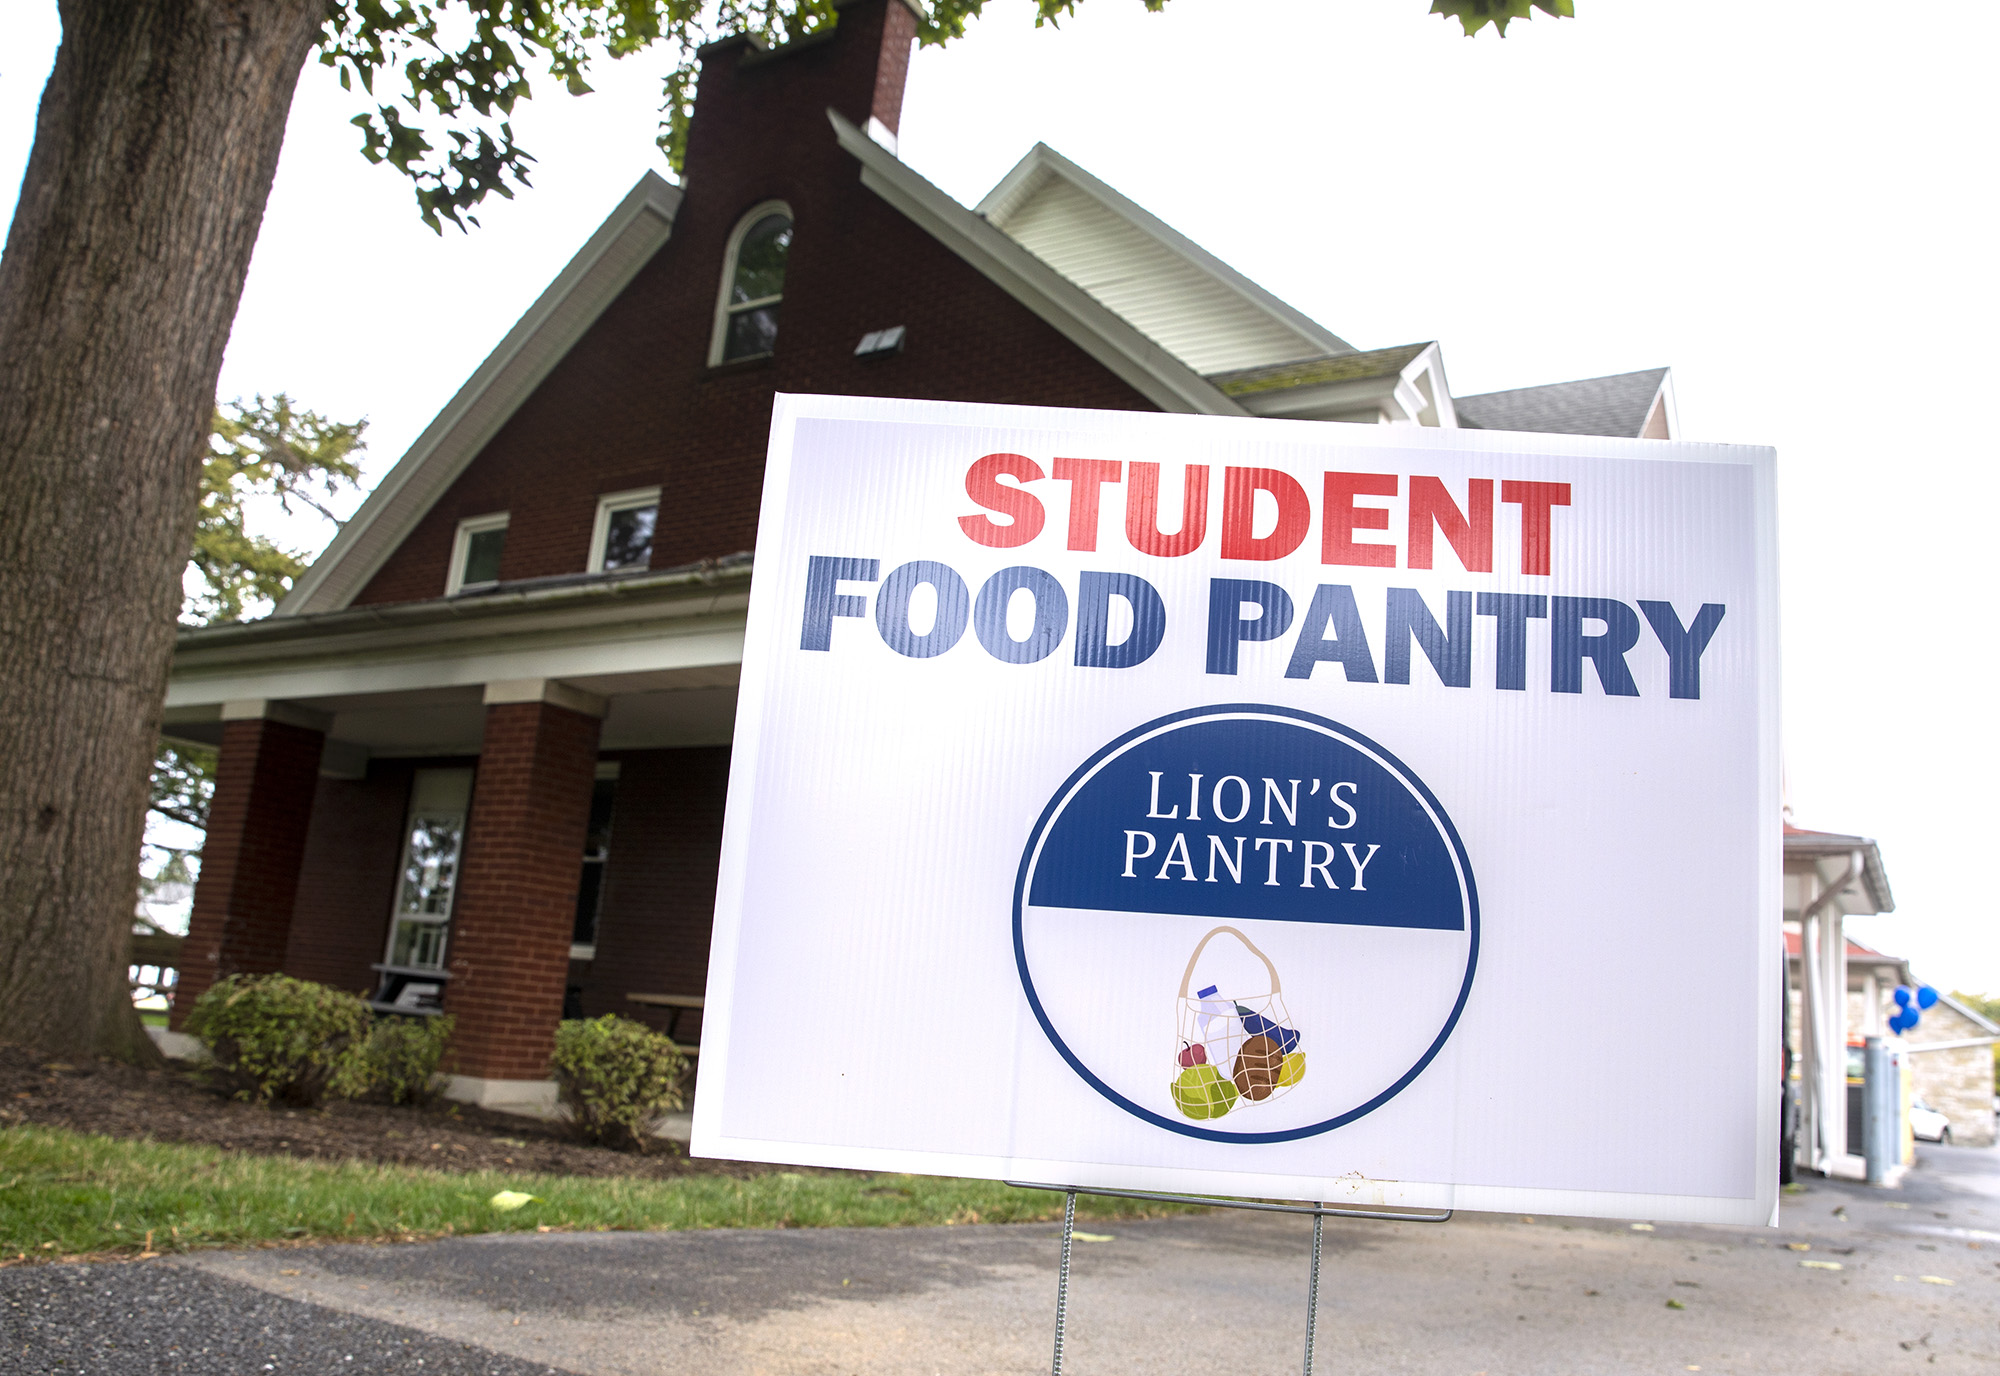 A sign that says "Student Food Pantry" and "Lion's Pantry" in a circle logo stands in front of the Student and Employee Food Pantry at 922 West Governor Road.